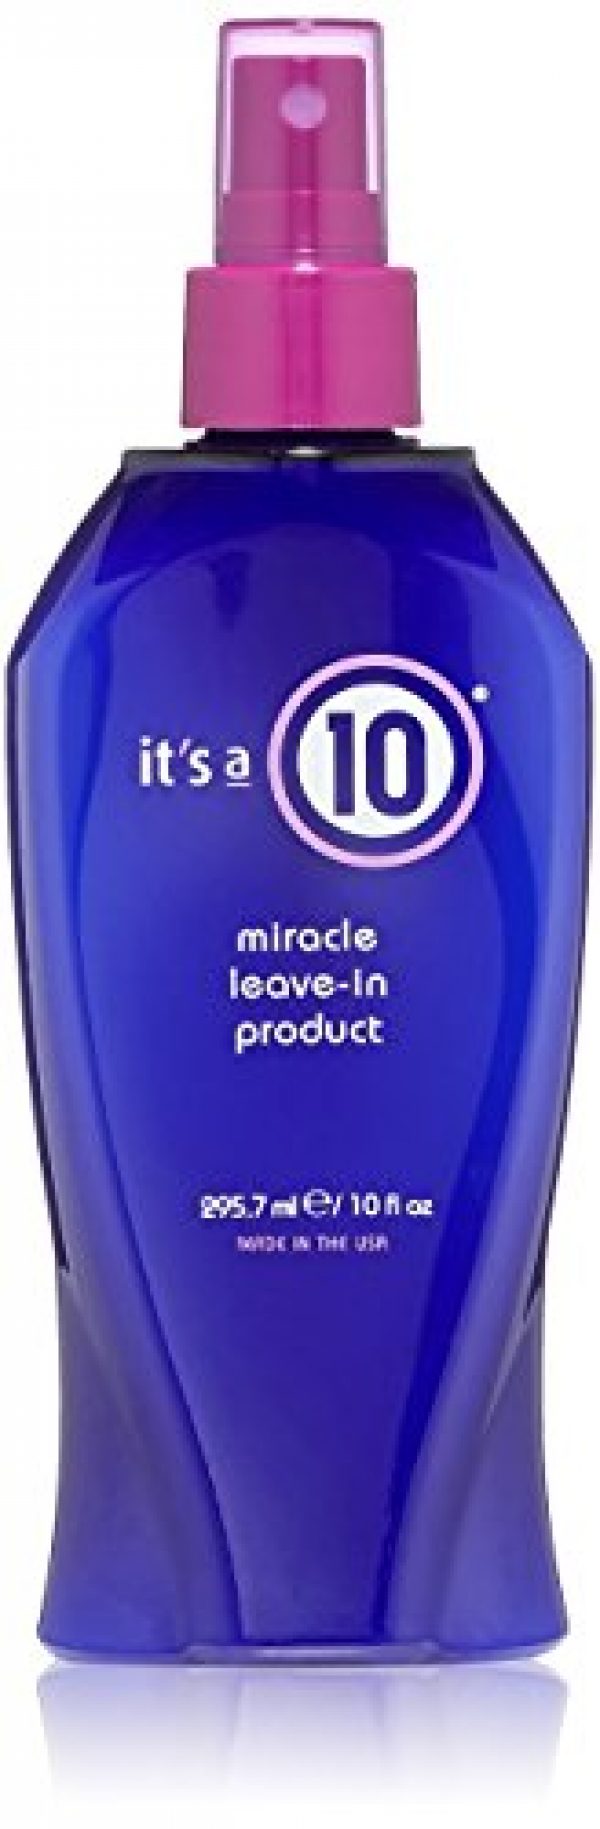 It's A 10 Haircare Miracle Leave-In Conditioner Spray - 10 oz. - 1ct 16